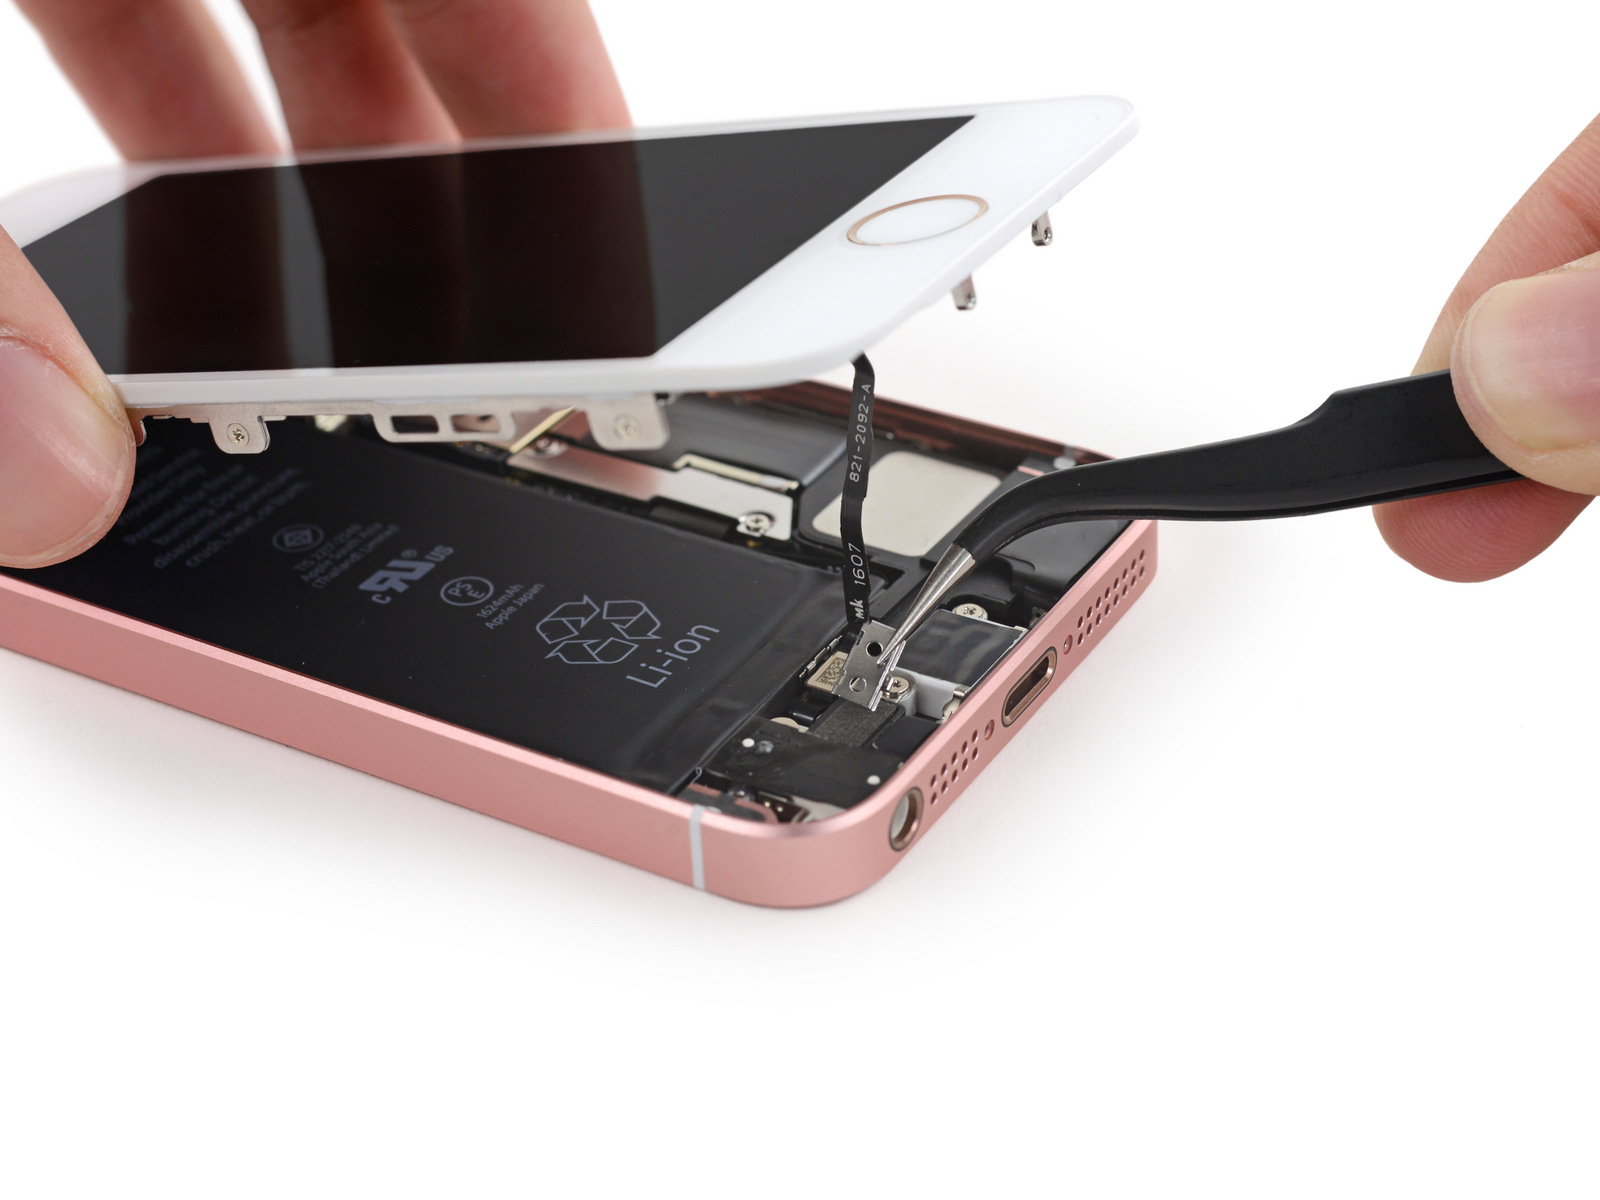 iFixit: The iPhone SE and iPhone 5S share many identical parts  The 